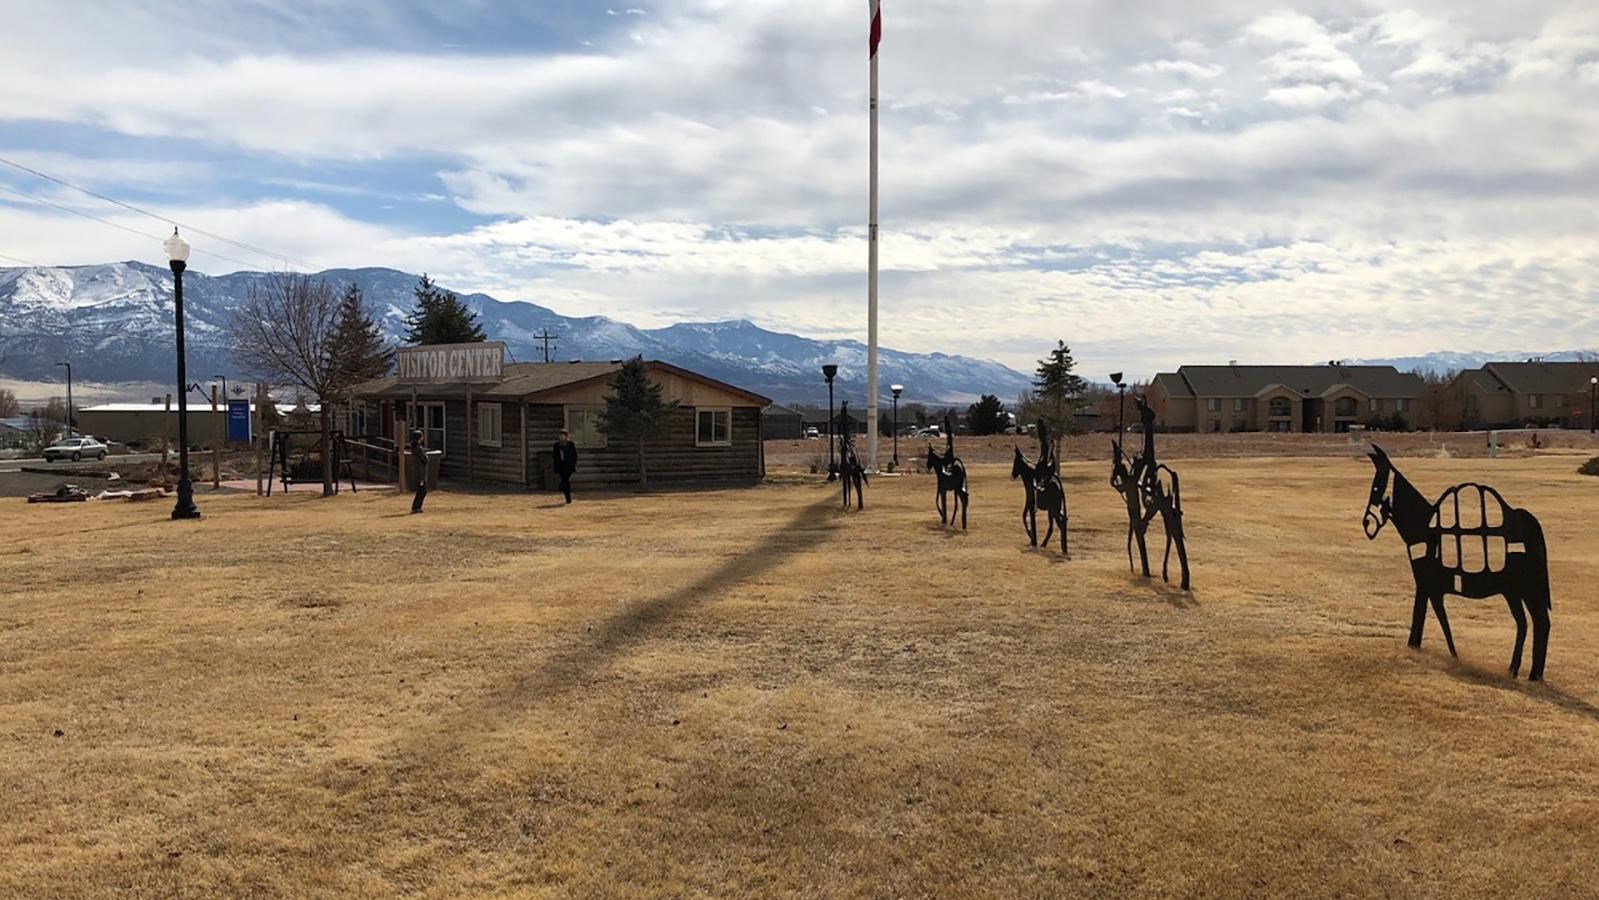 Silhouettes of a mule team in a grassy field next to a visitor center building.